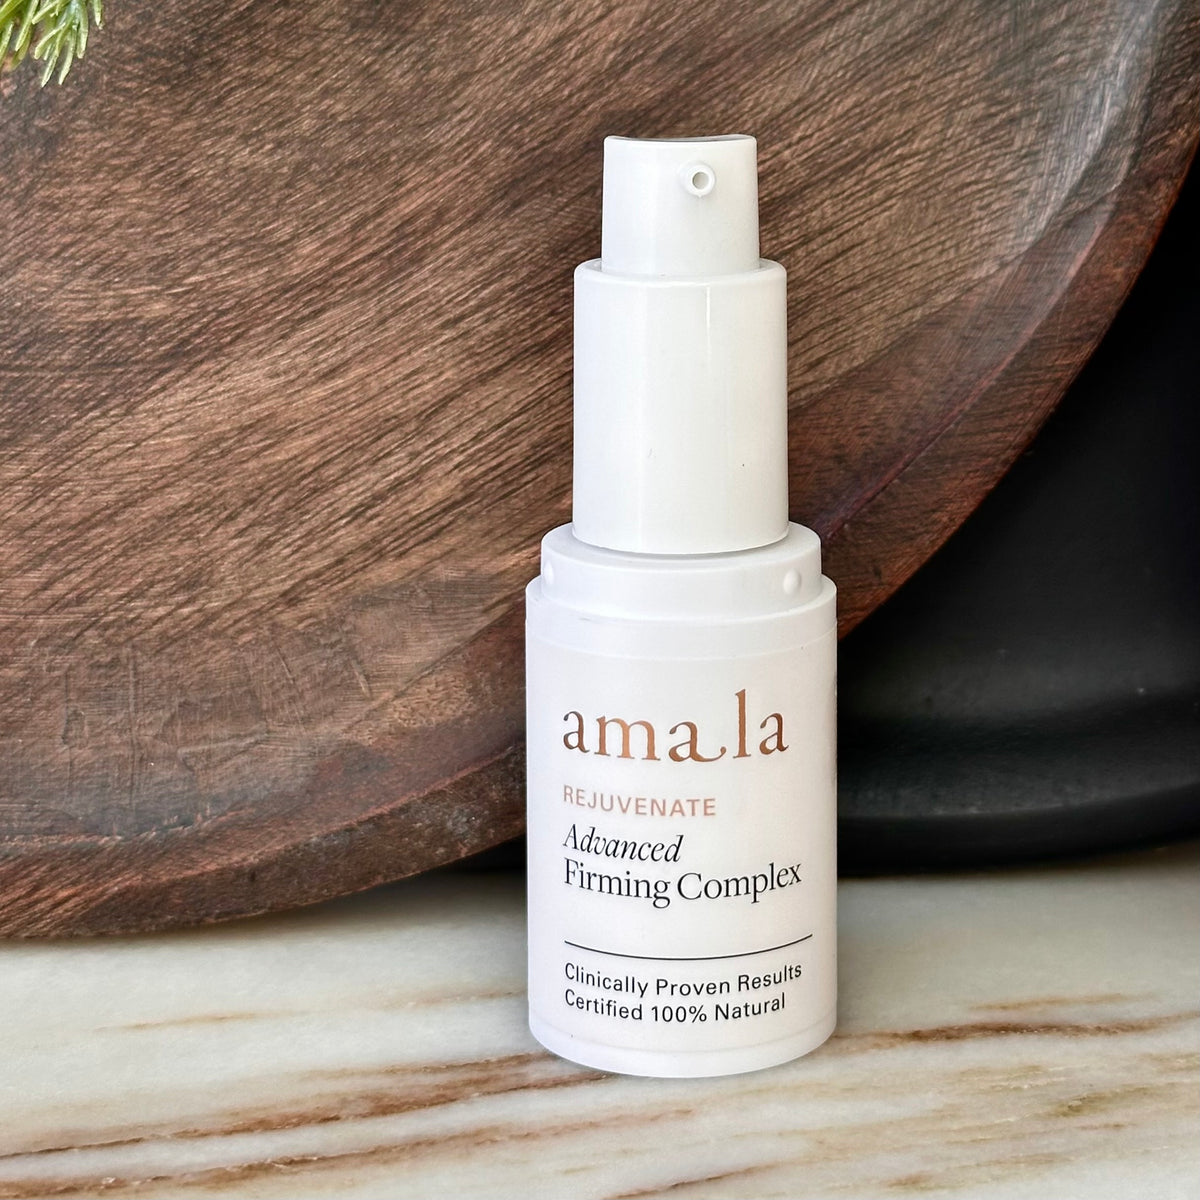 Little Luxuries: Experience Amala&#39;s Most Transformative Ritual